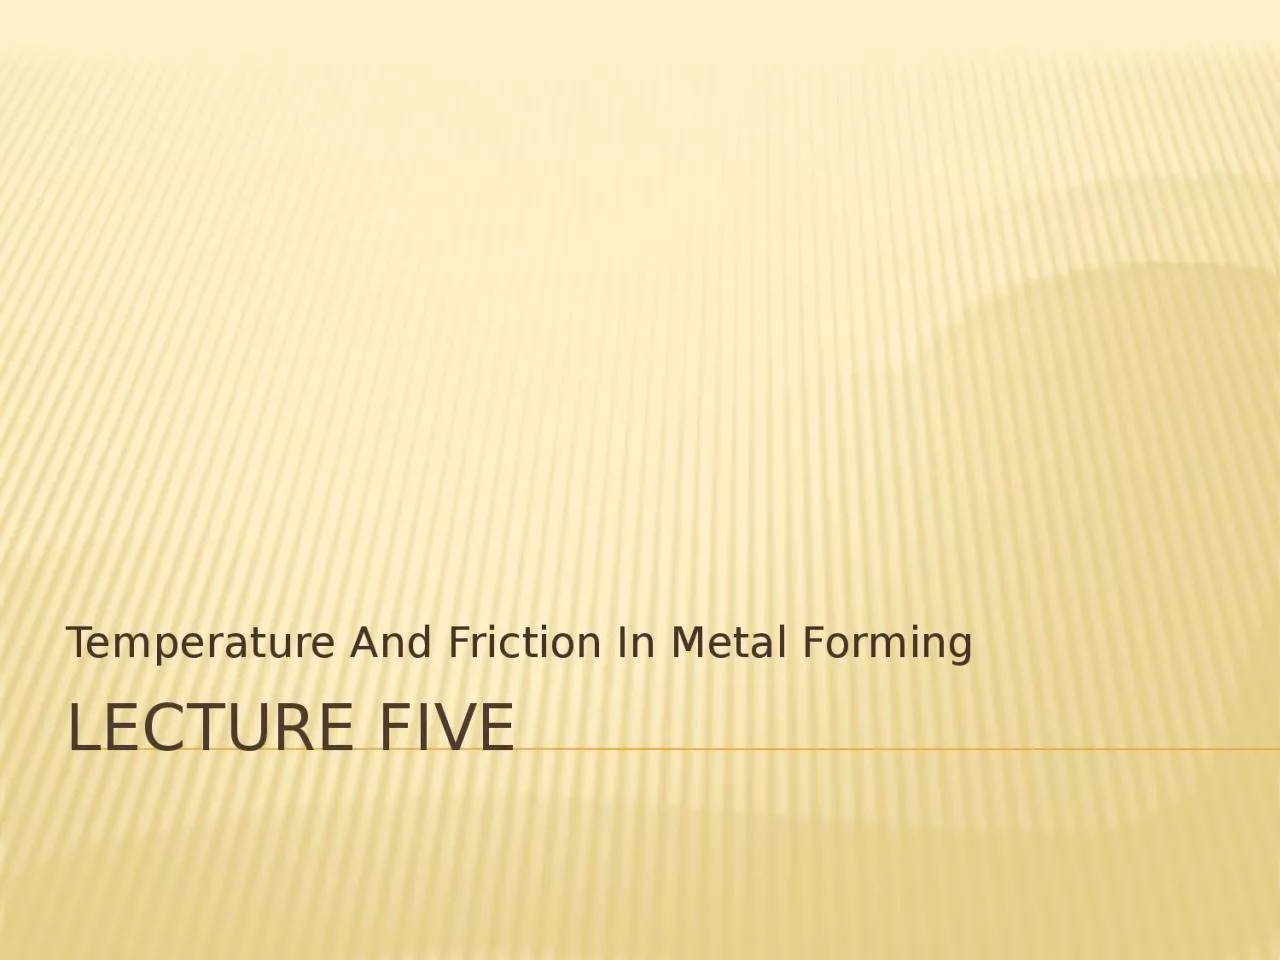 LECTURE FIVE Temperature And Friction In Metal Forming